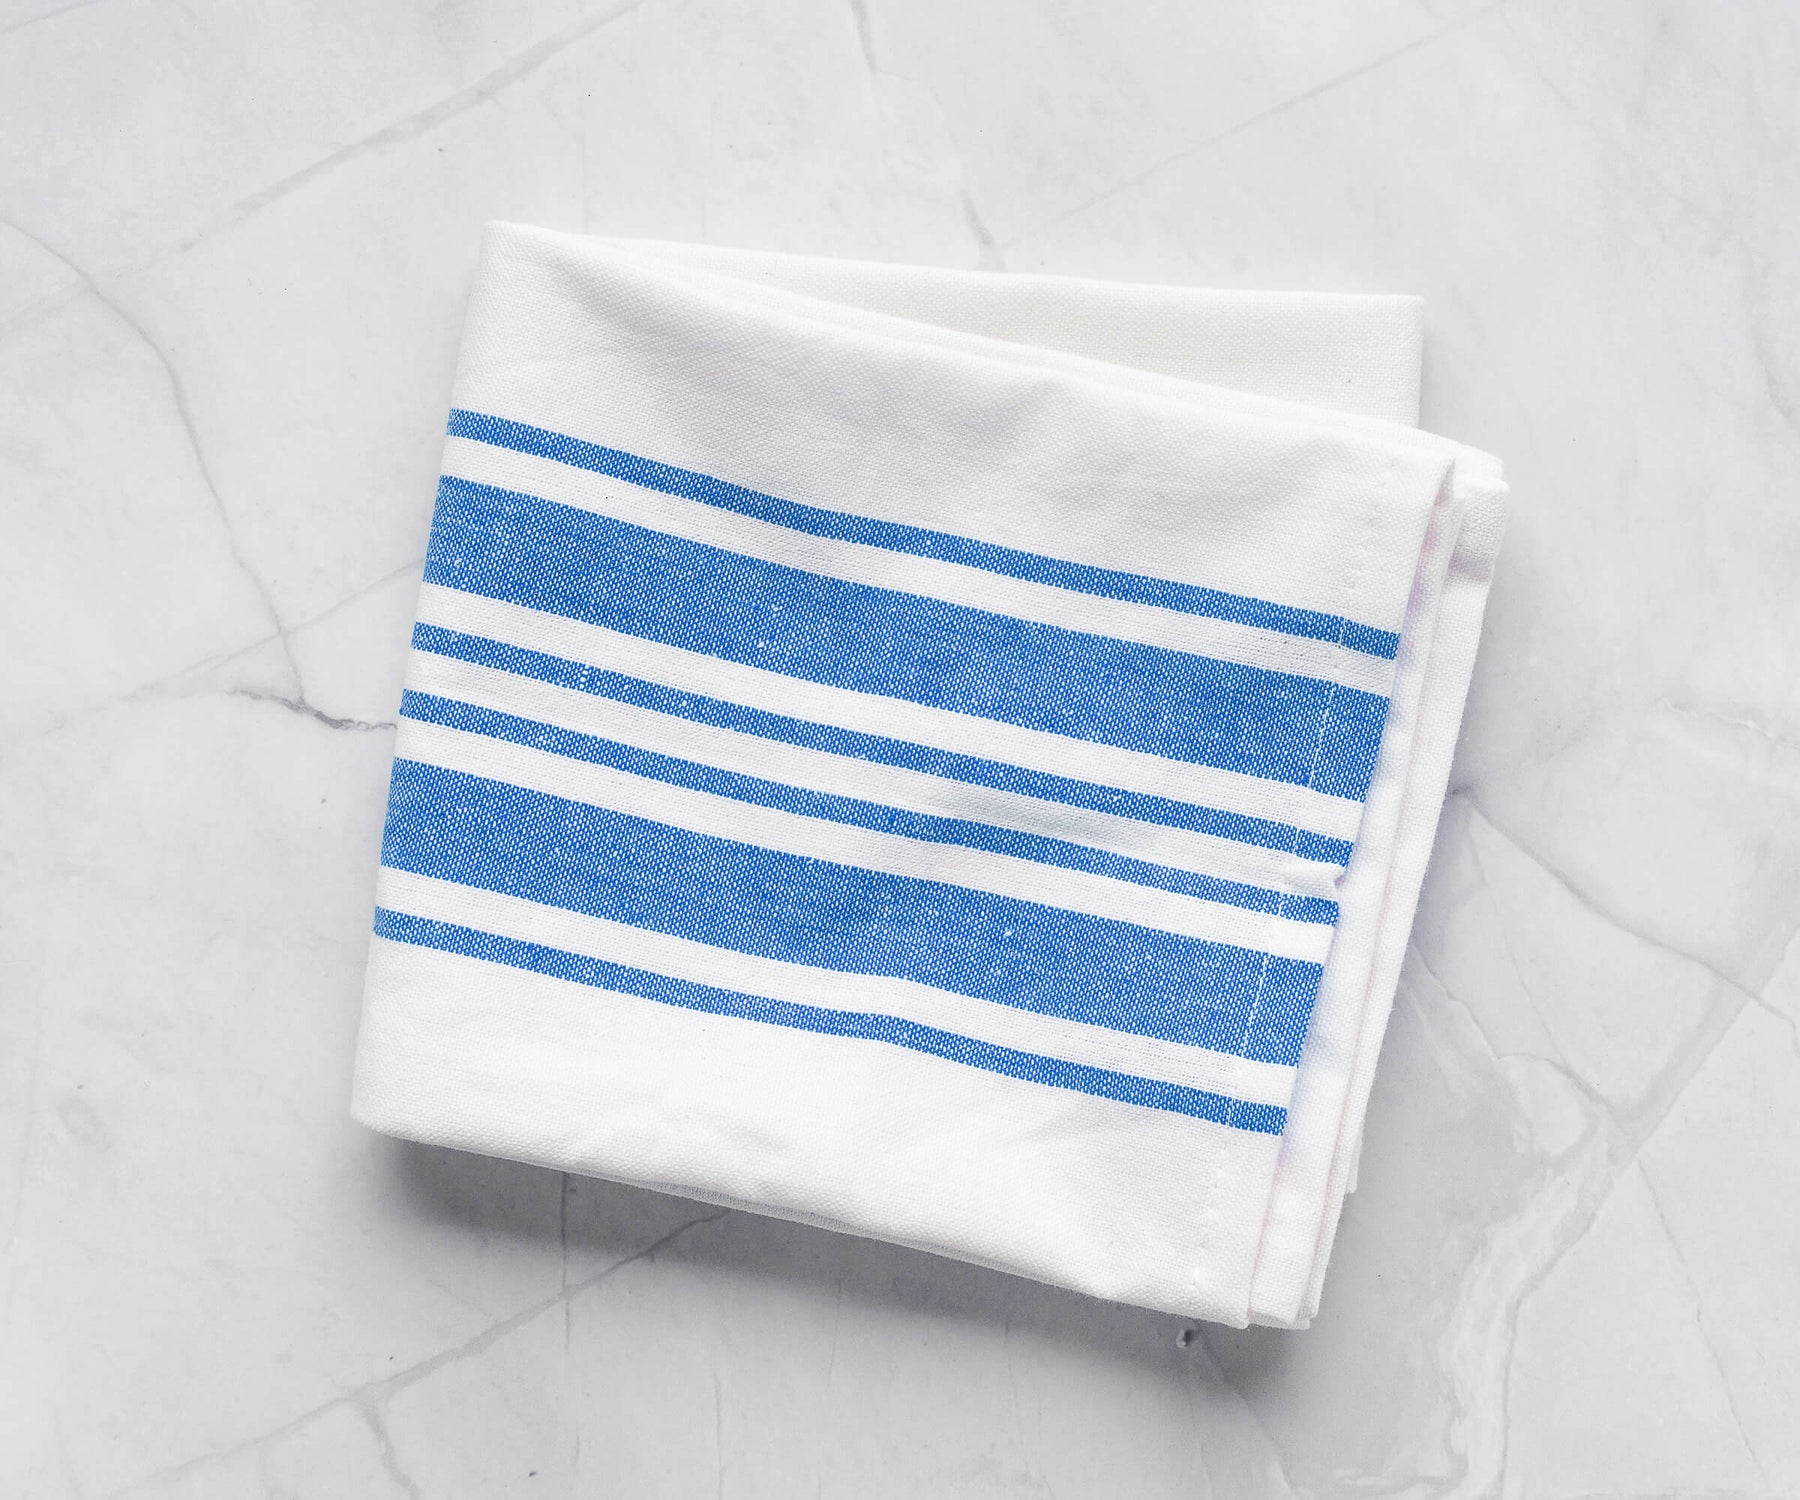 Kitchen towel with blue stripes against a marble background